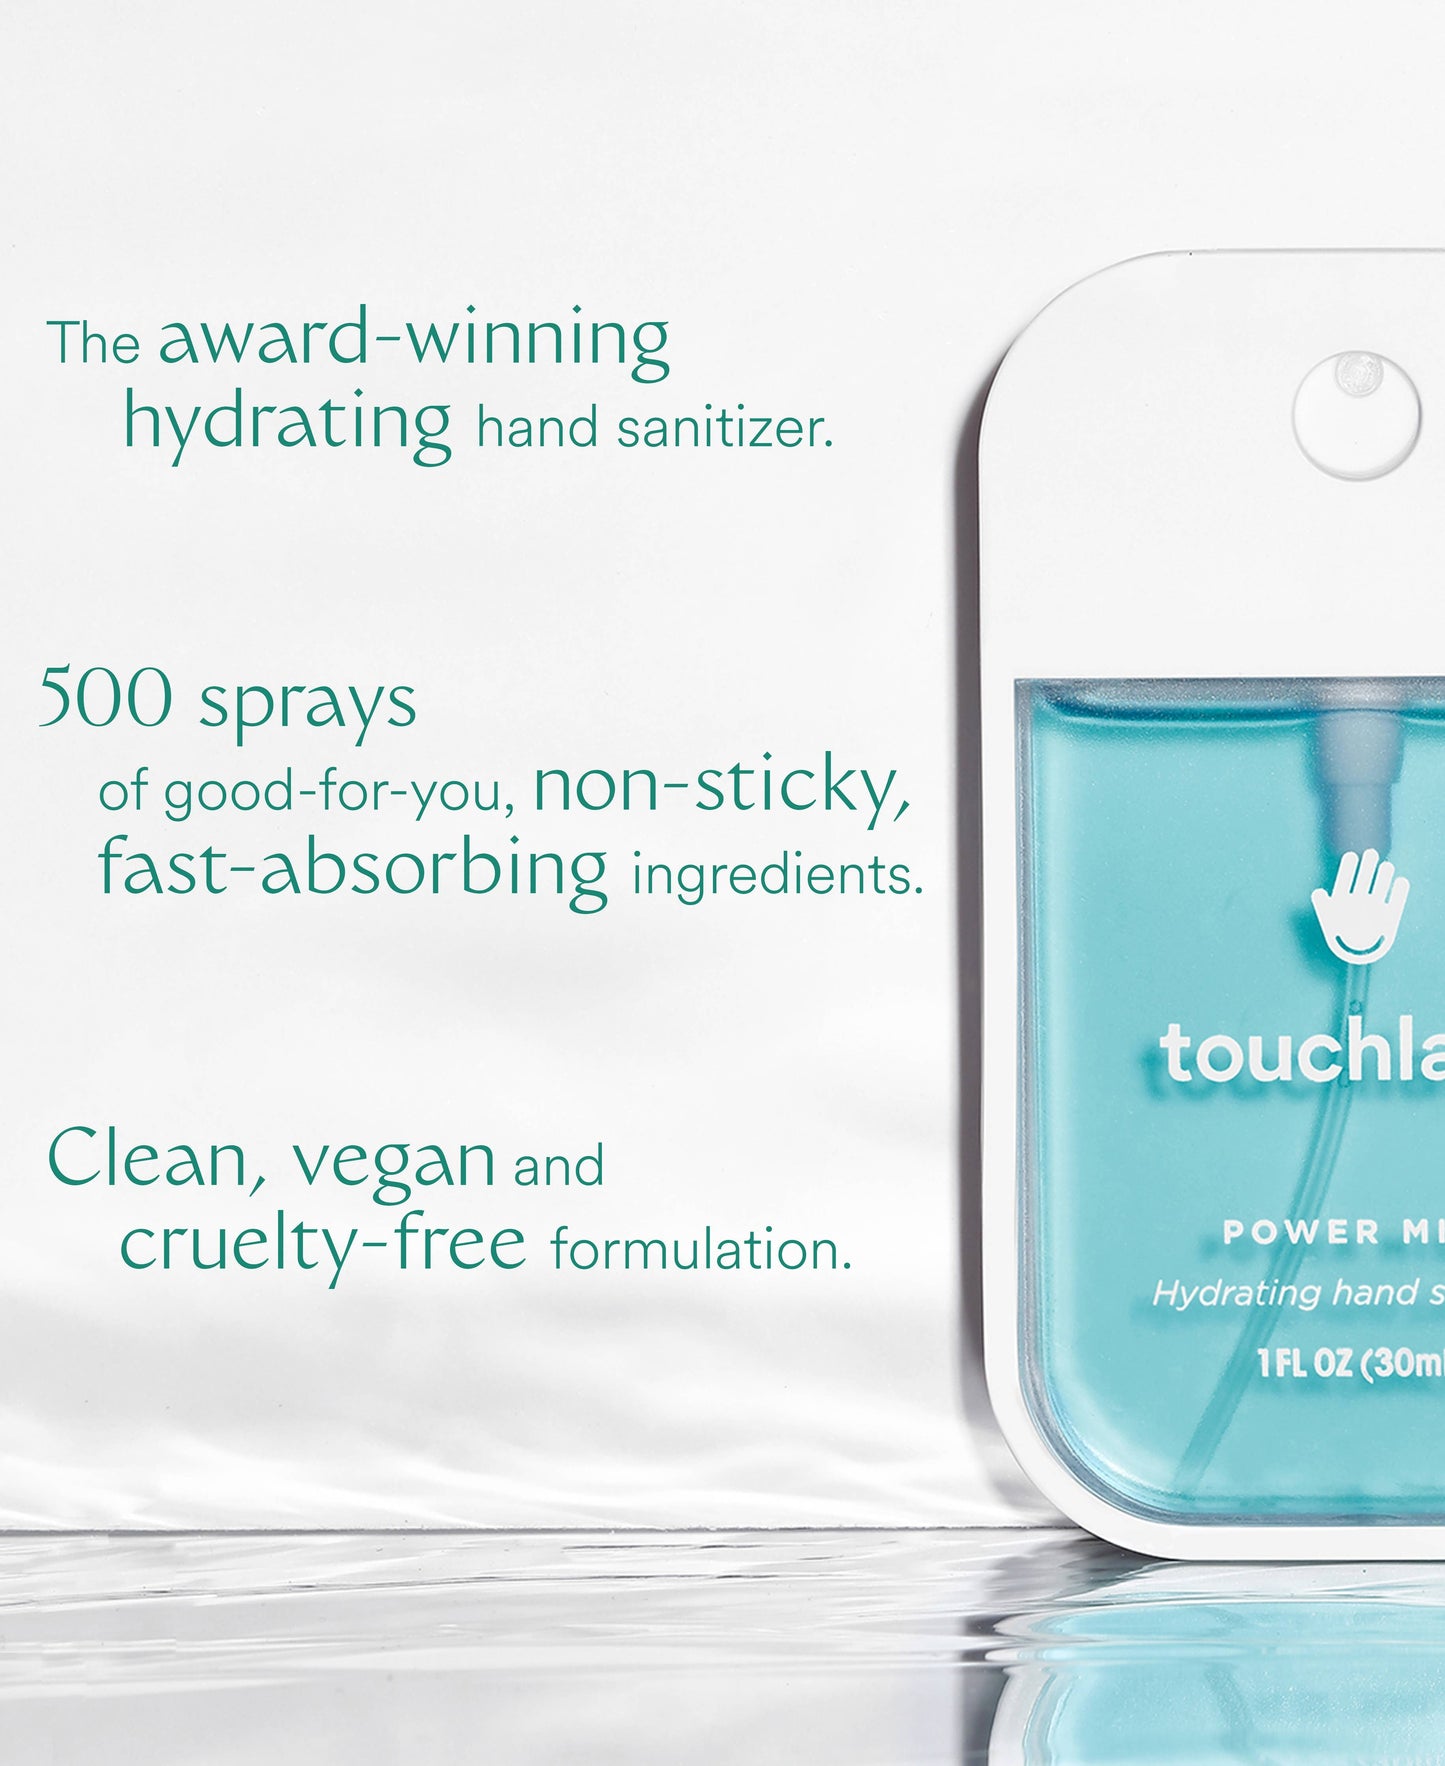 Touchland Power Mist Hand Sanitizer | Frosted Mint-Touchland--The Twisted Chandelier